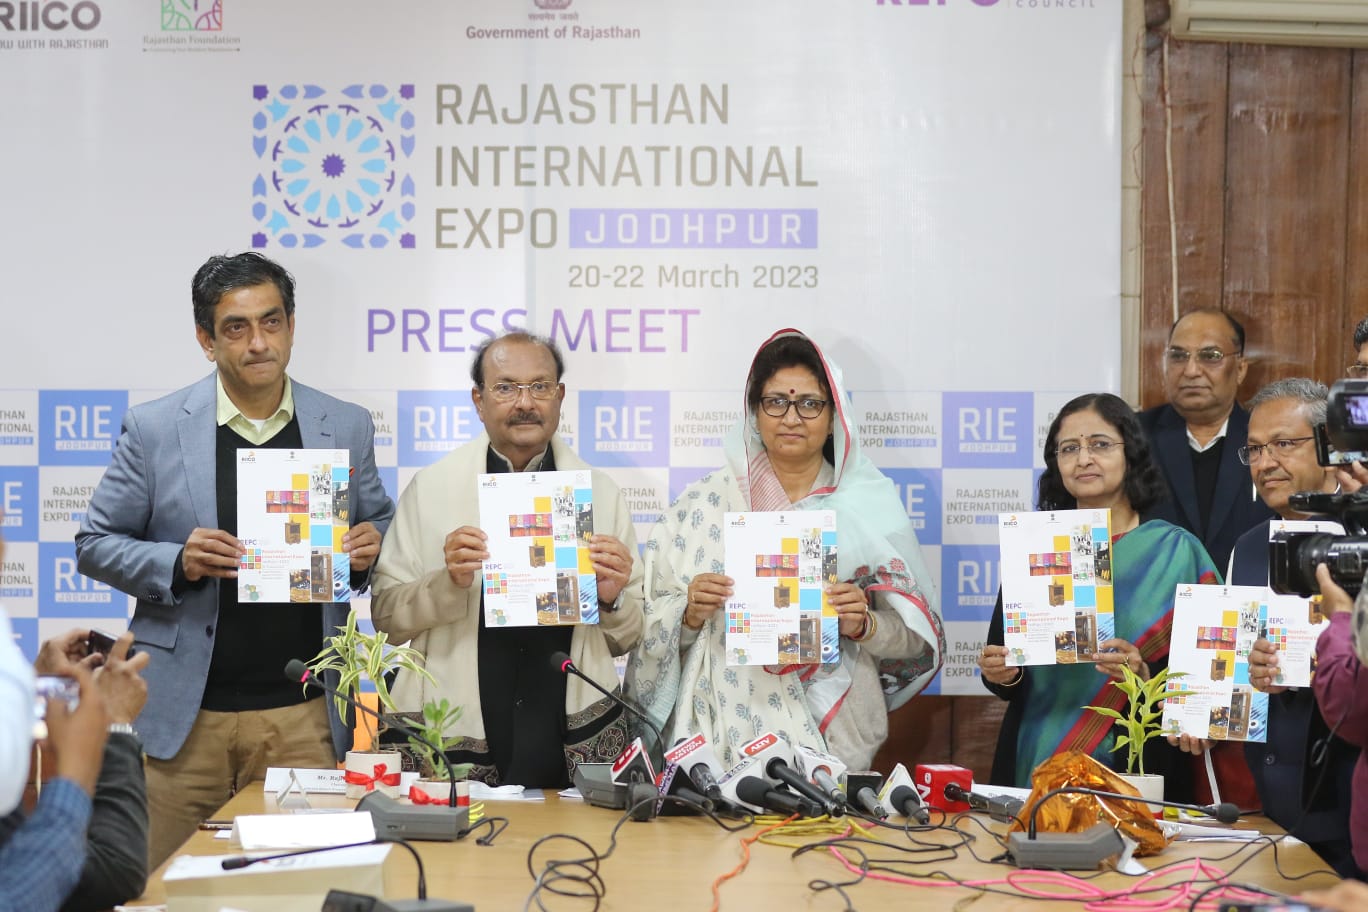 Rajasthan International Expo to be held in Jodhpur next month